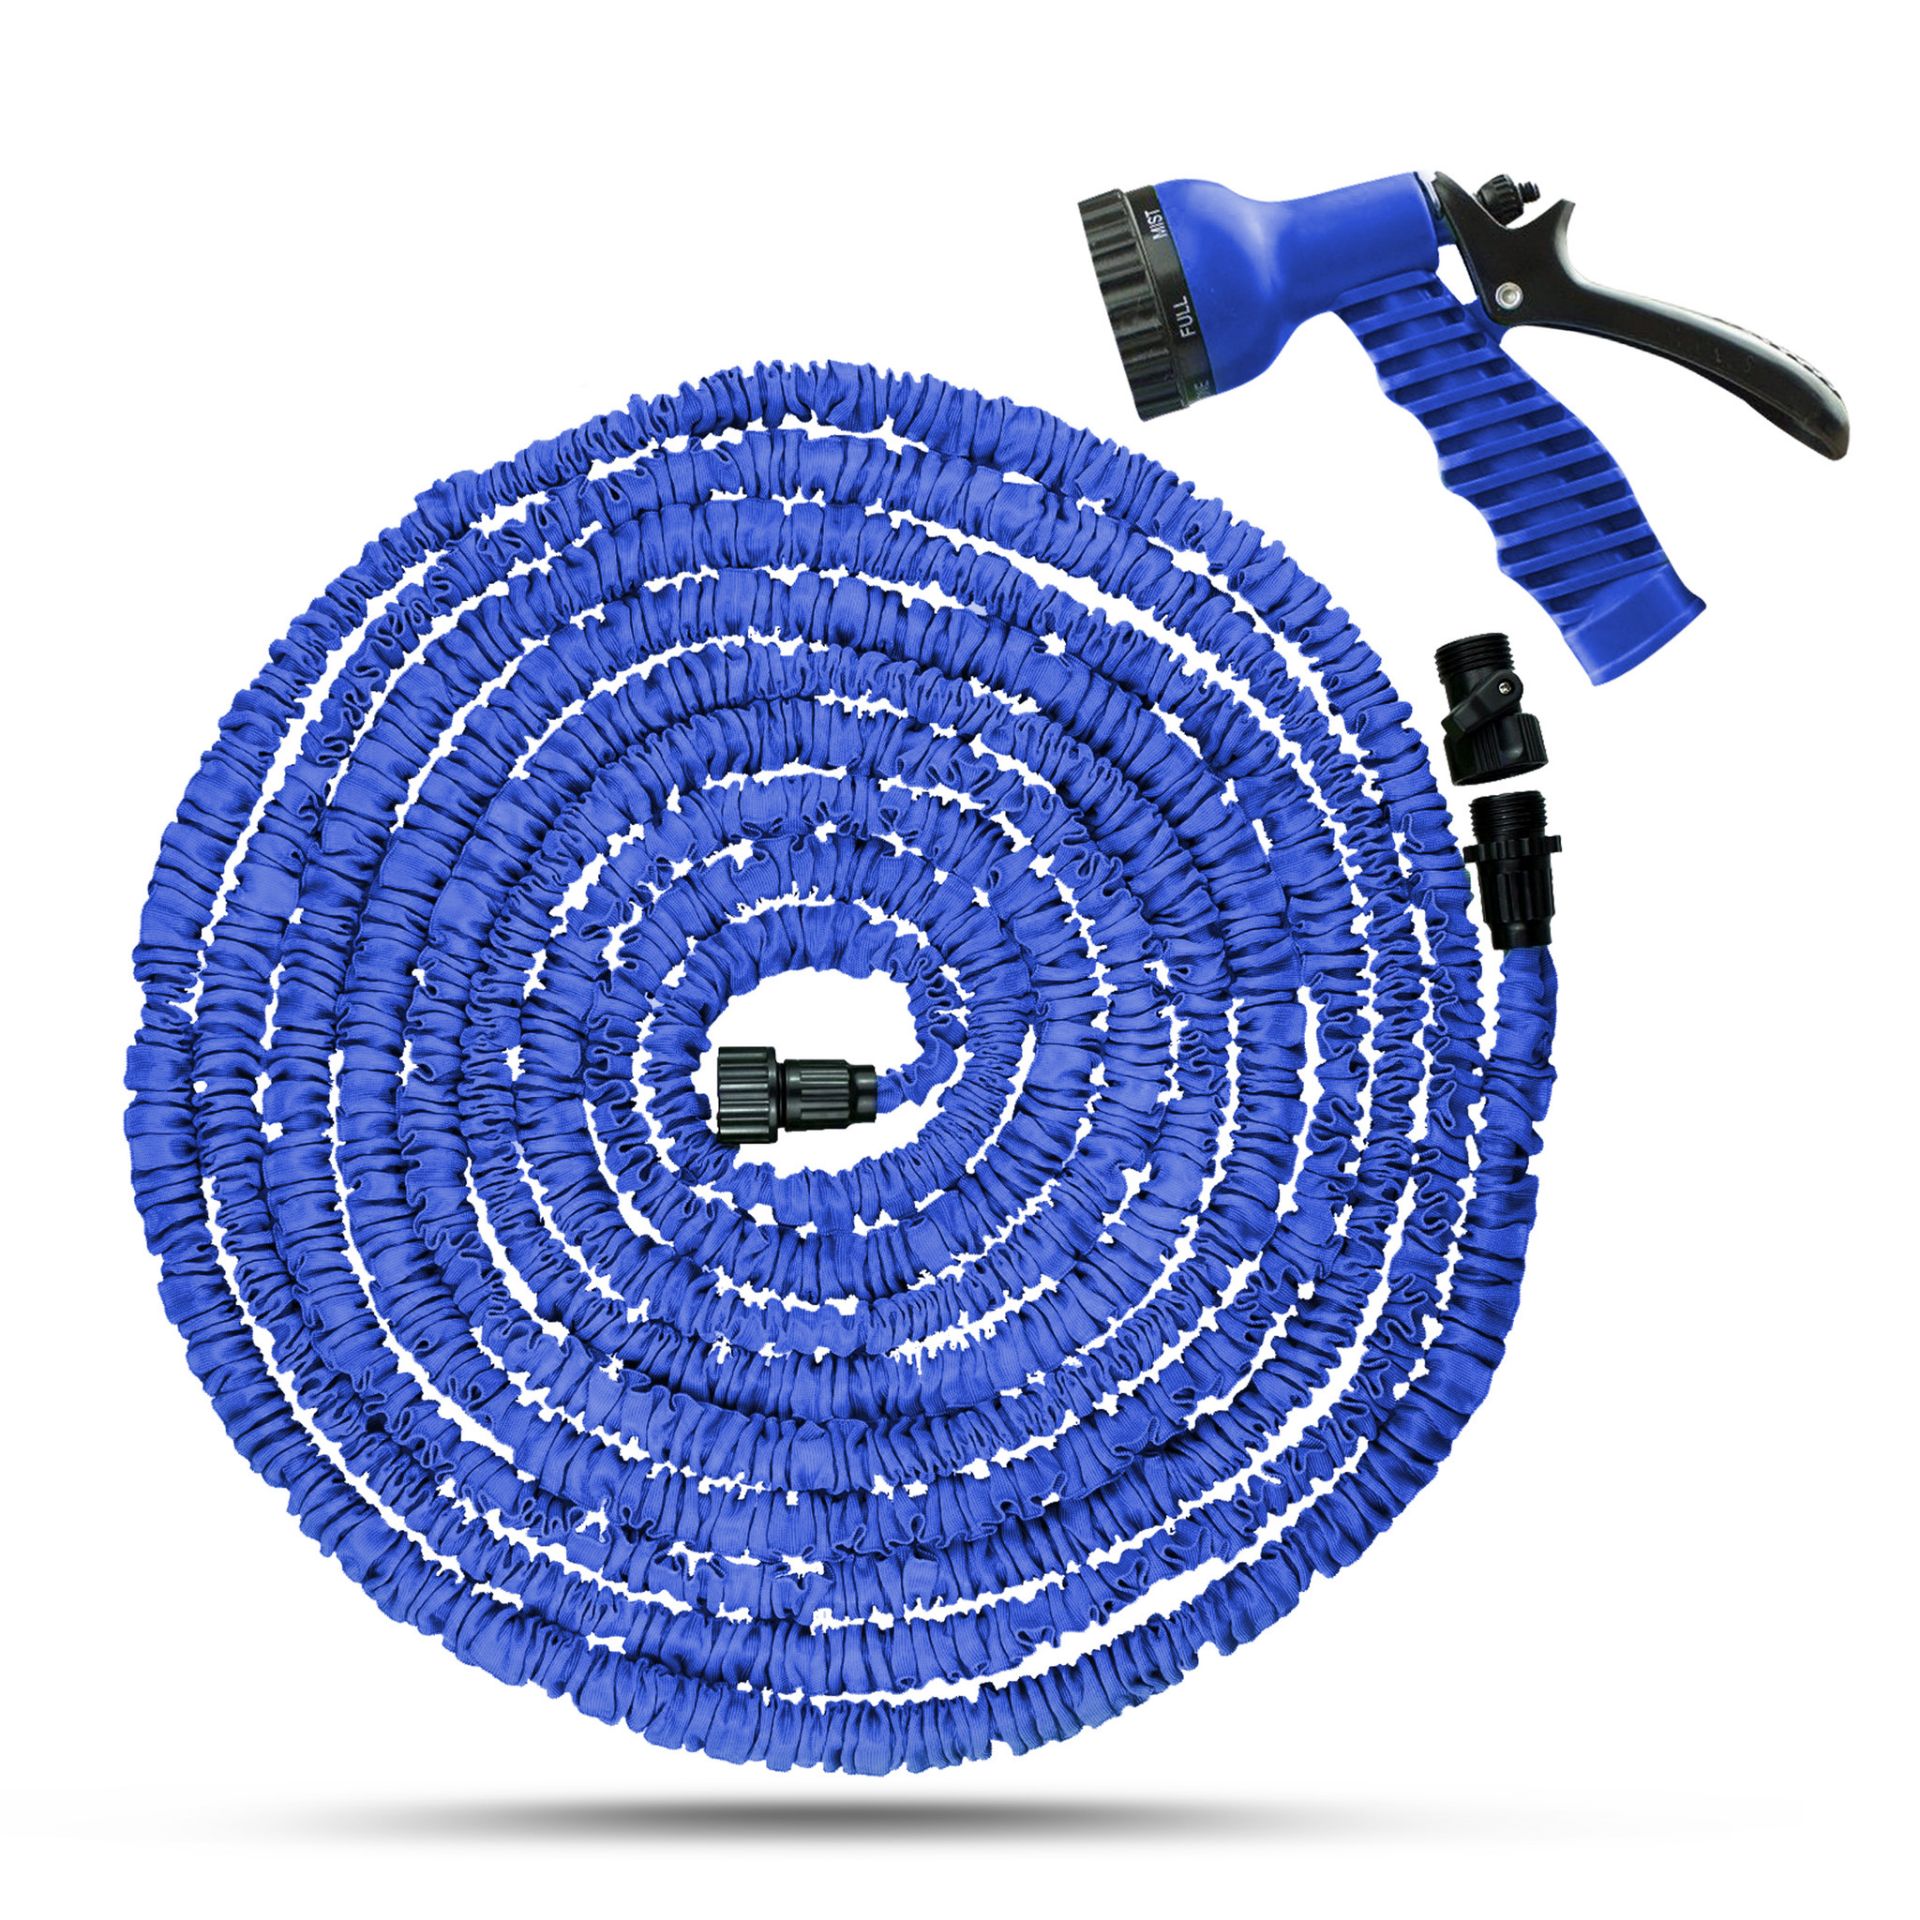 V Brand New 75 Foot Expandable Hose - Automatically Expands - Lightweight - Easily Stored eBay Price